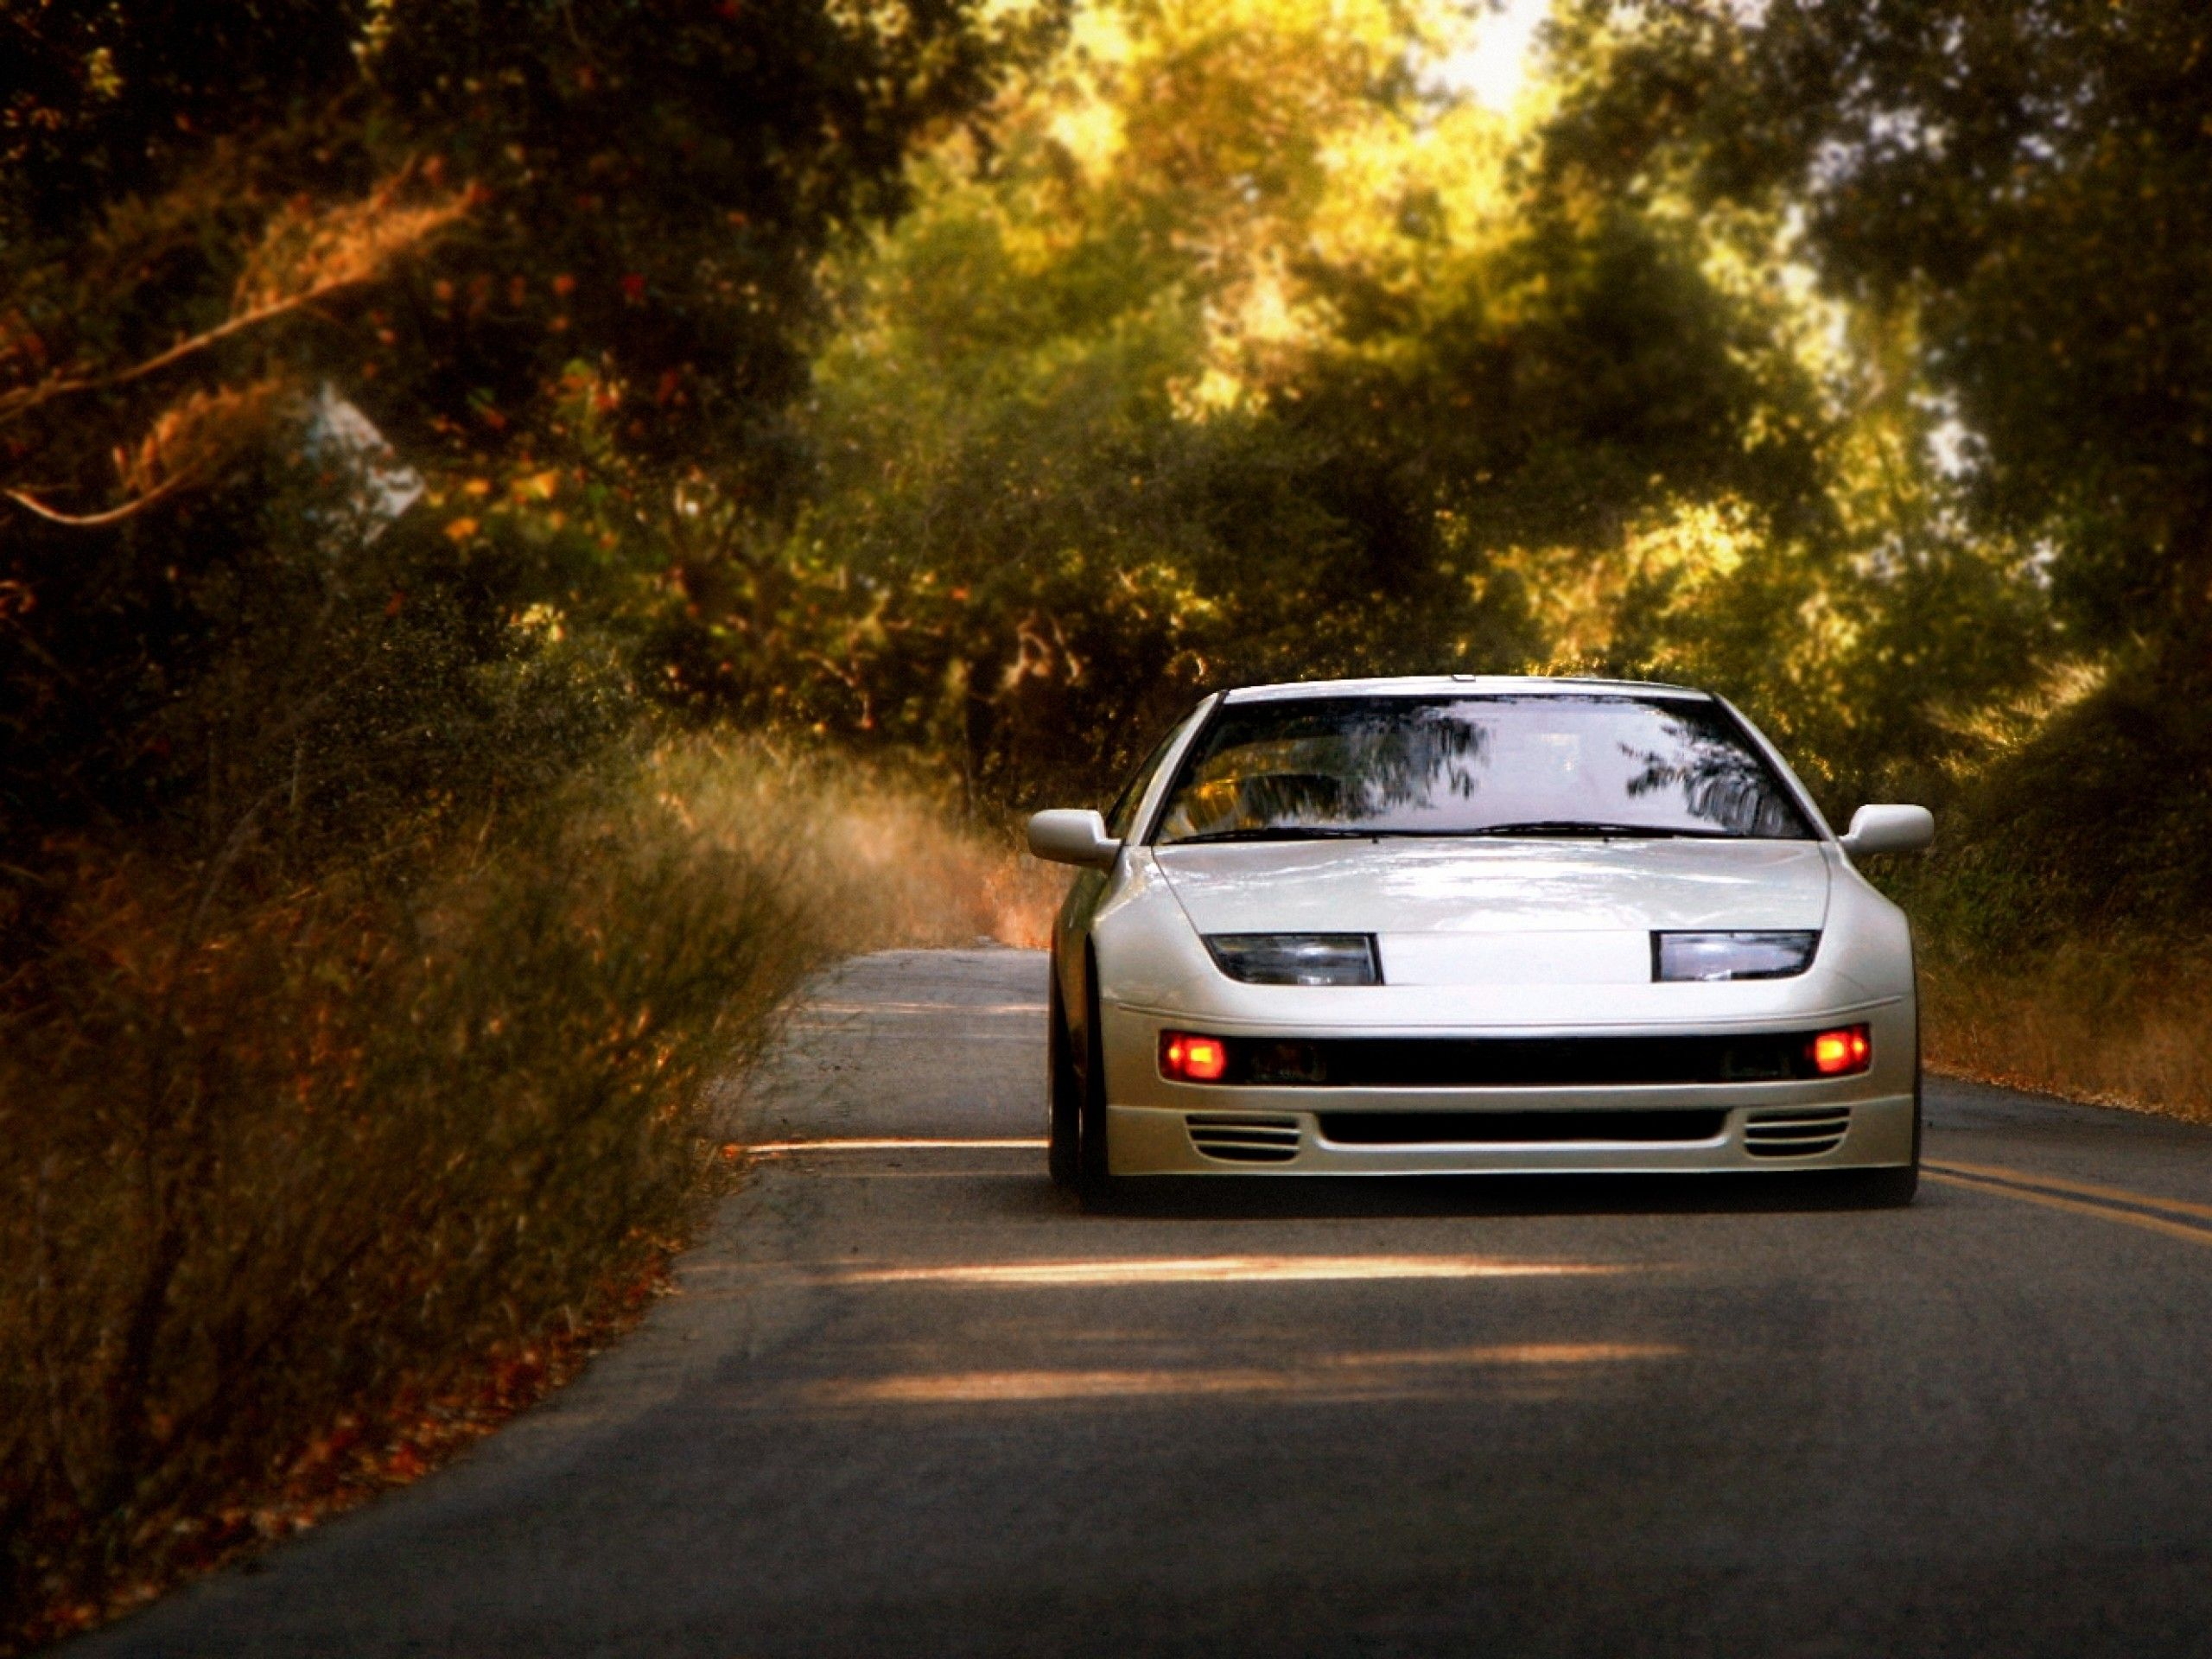 2560x1920 Nissan 300ZX Wallpapers Top Free Nissan 300ZX Backgrounds